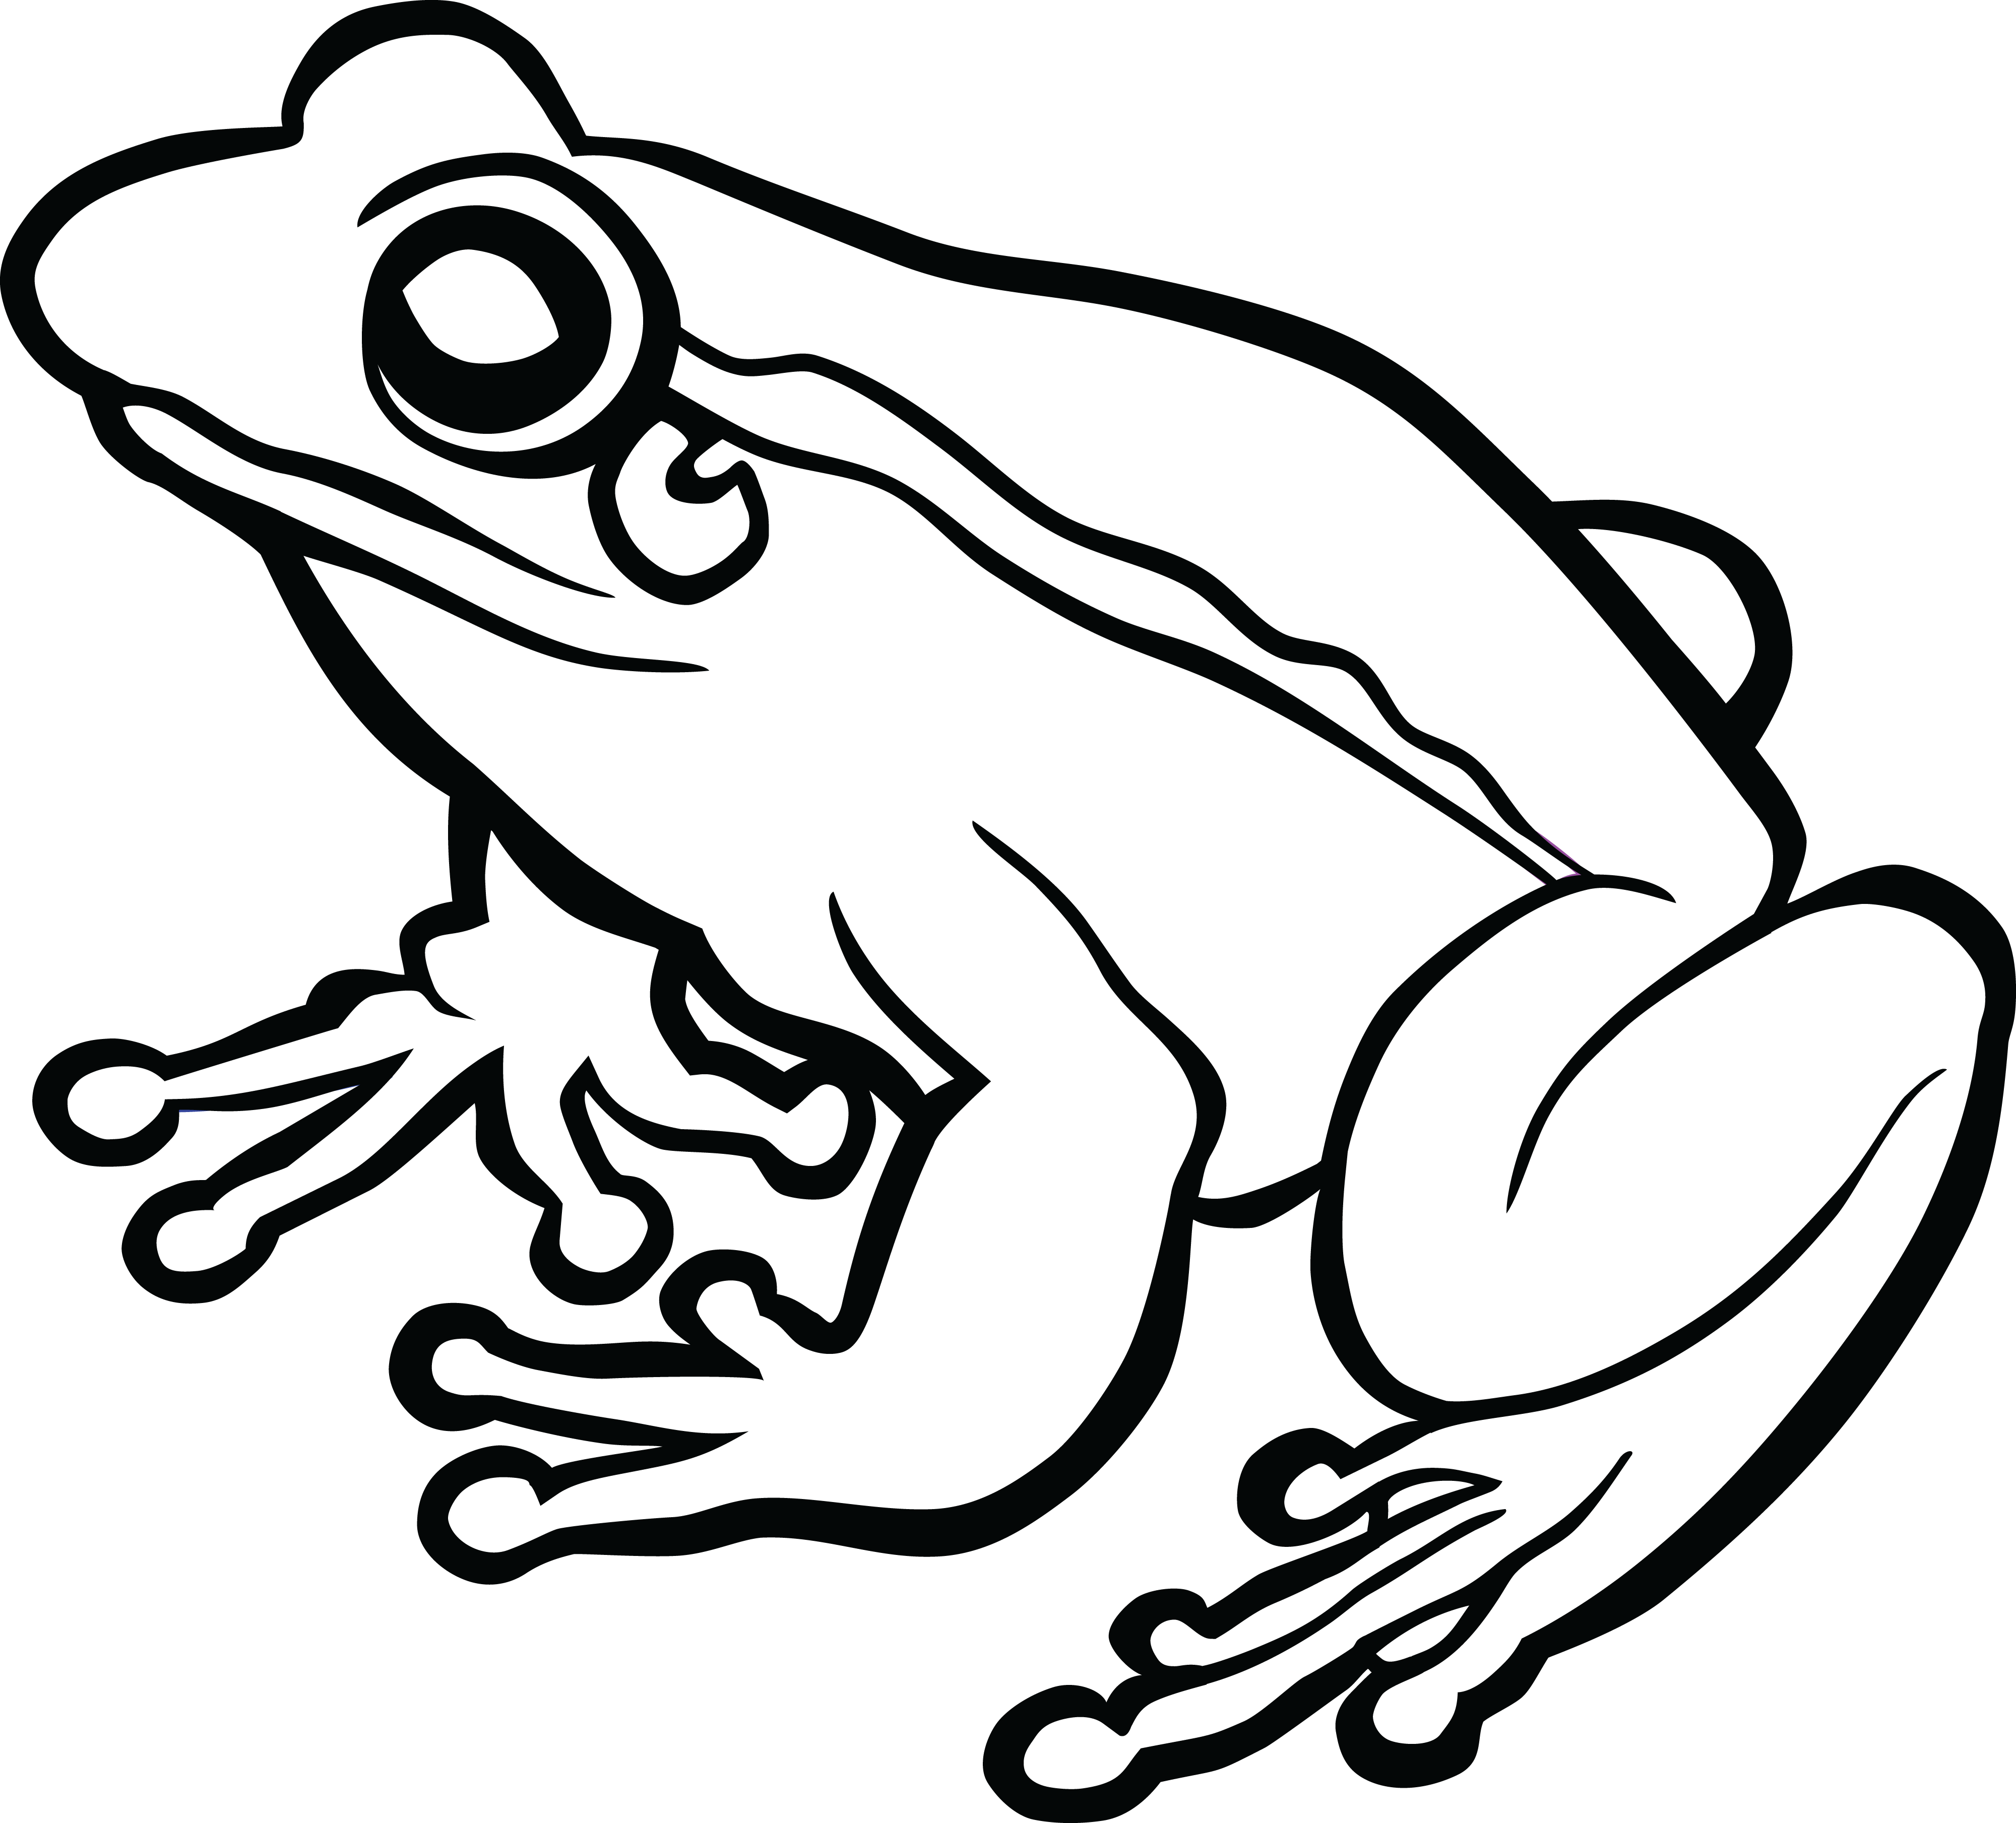 Frog Black and white Cartoon 